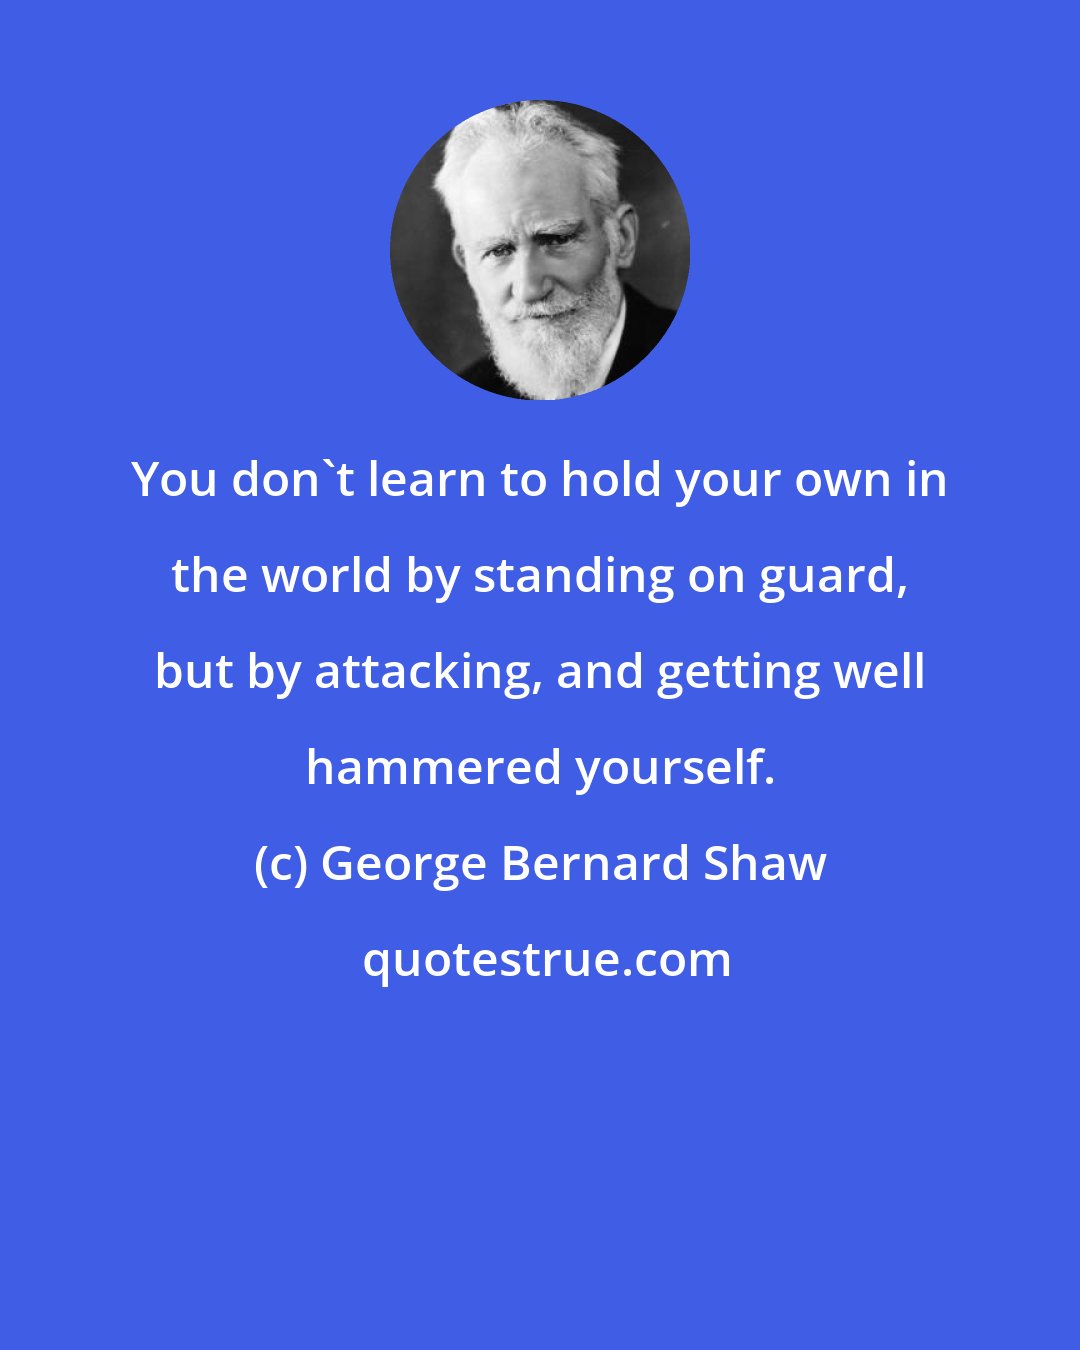 George Bernard Shaw: You don't learn to hold your own in the world by standing on guard, but by attacking, and getting well hammered yourself.